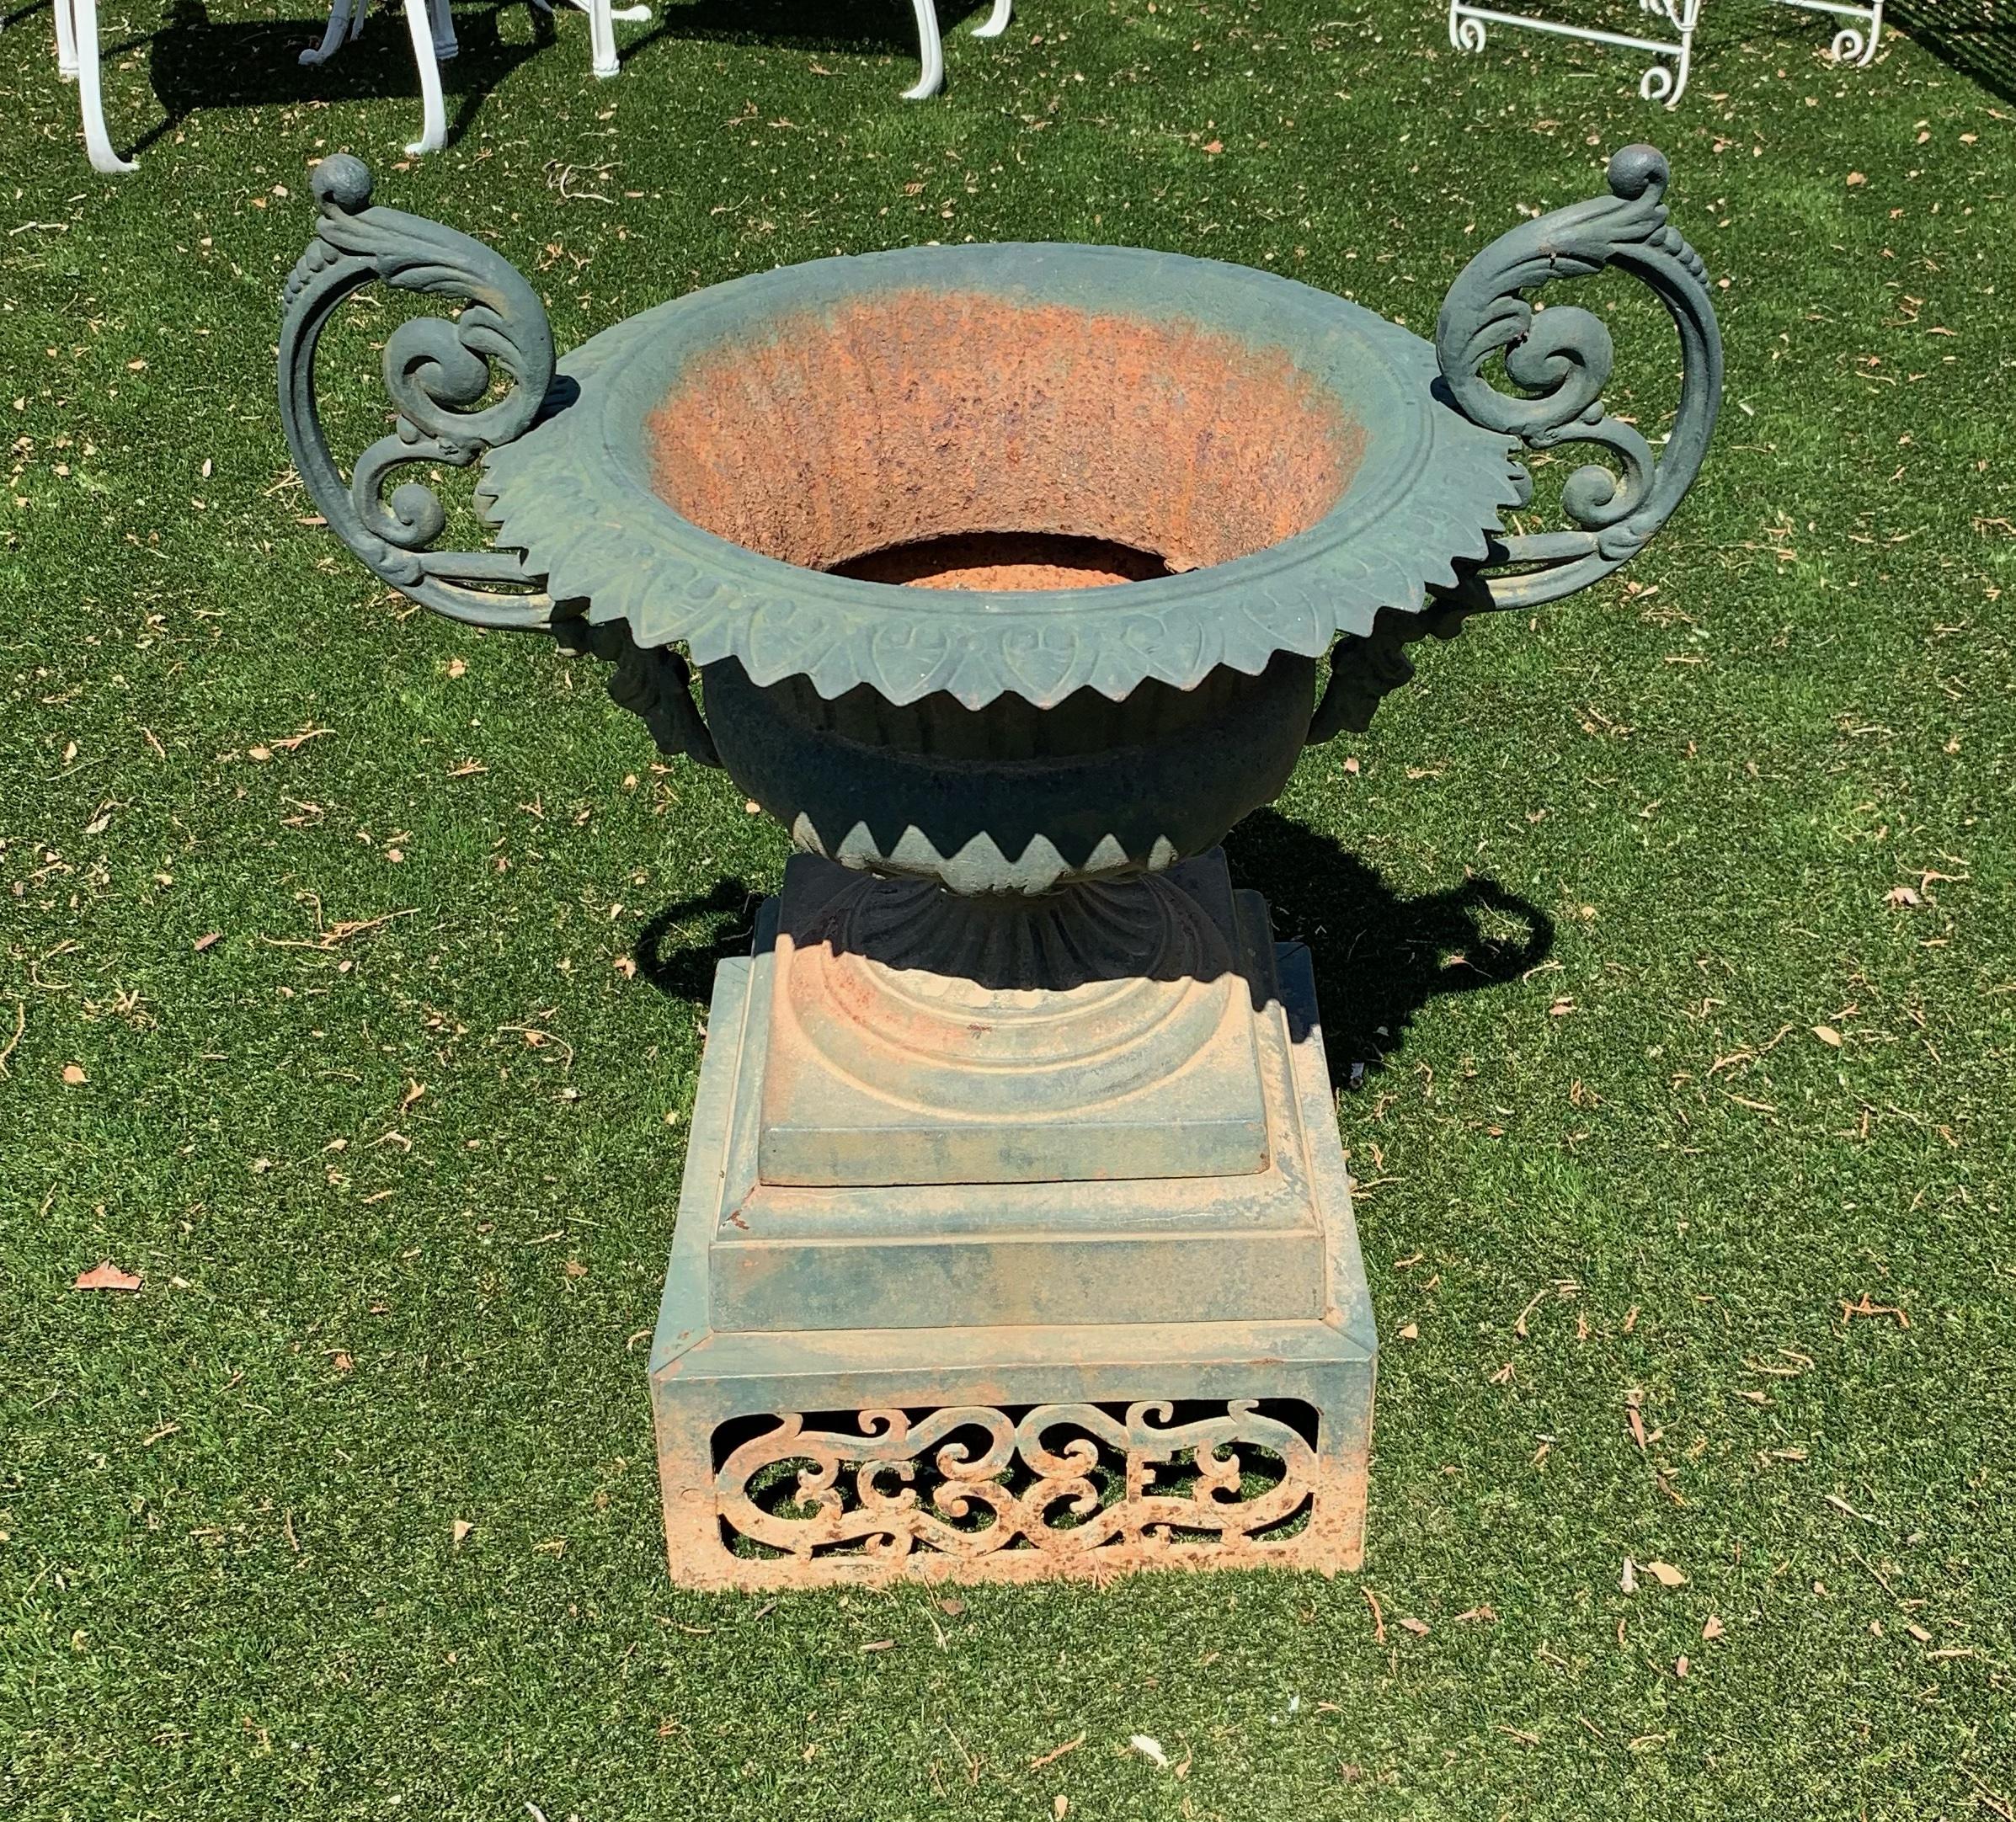 Mid-20th Century Garden Beauty of an Urn with Gorgeous Verdigris Patina and Fancy Handles